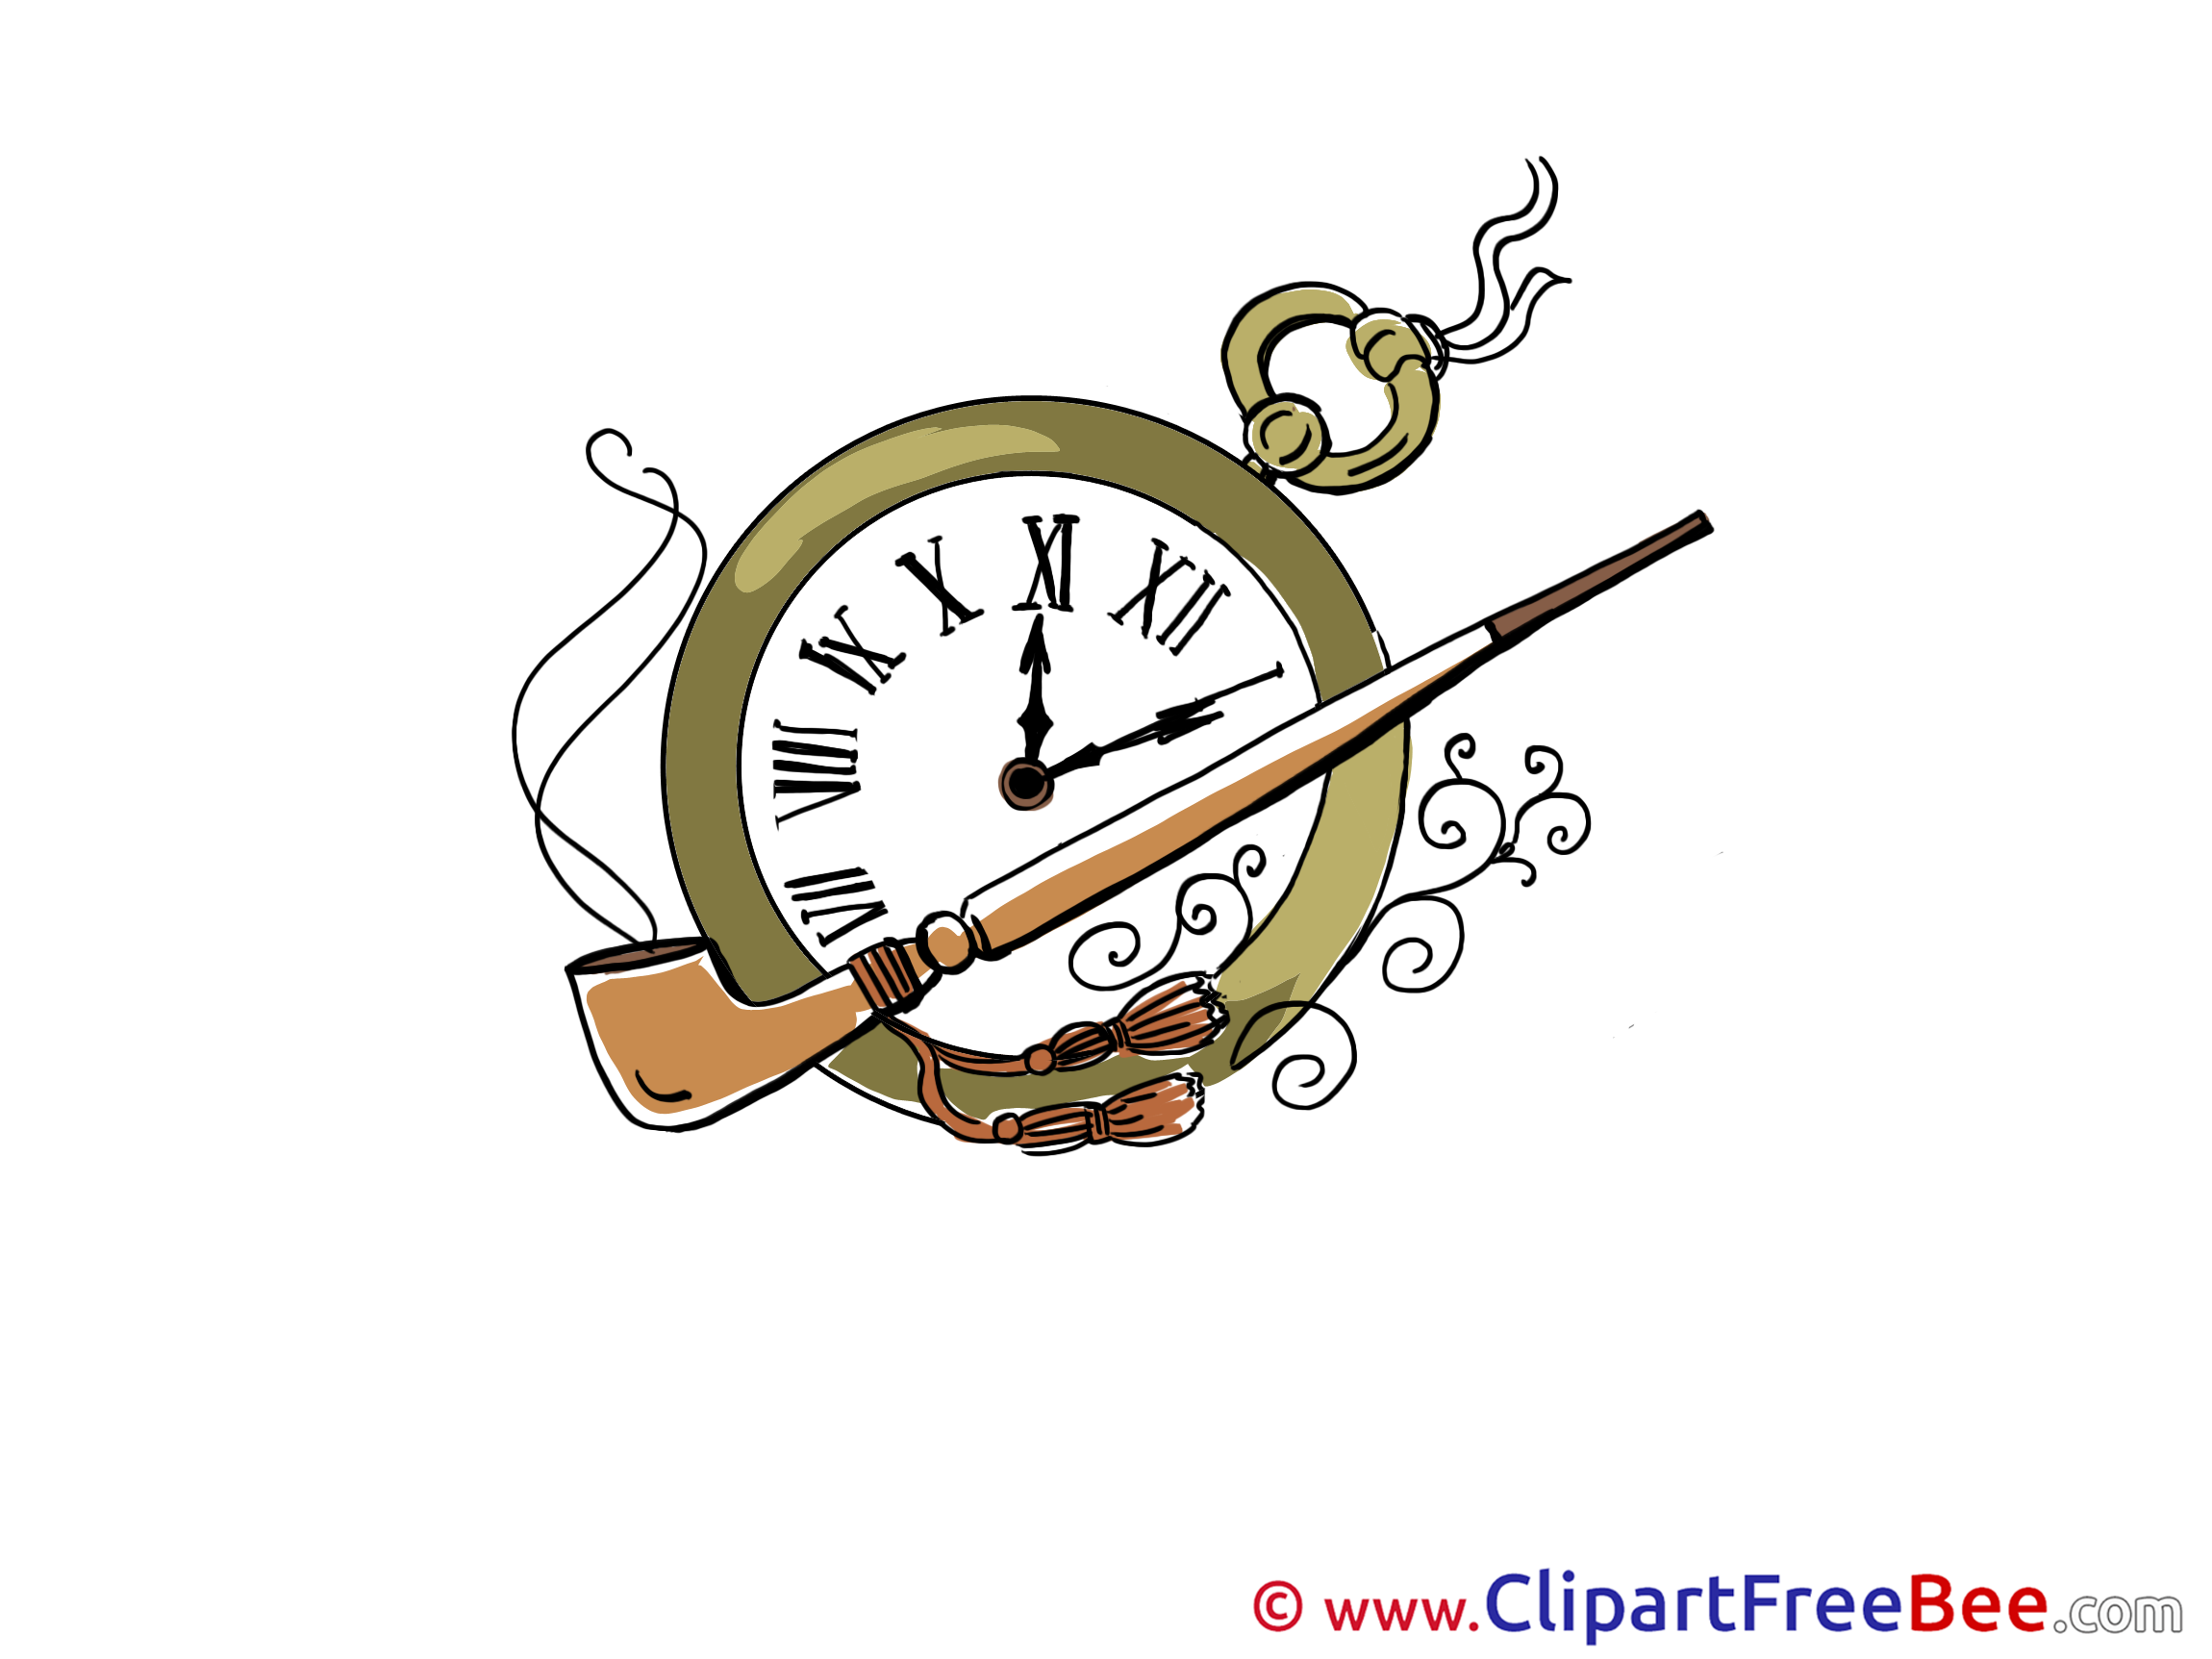 Clock Pipe Cliparts printable for free